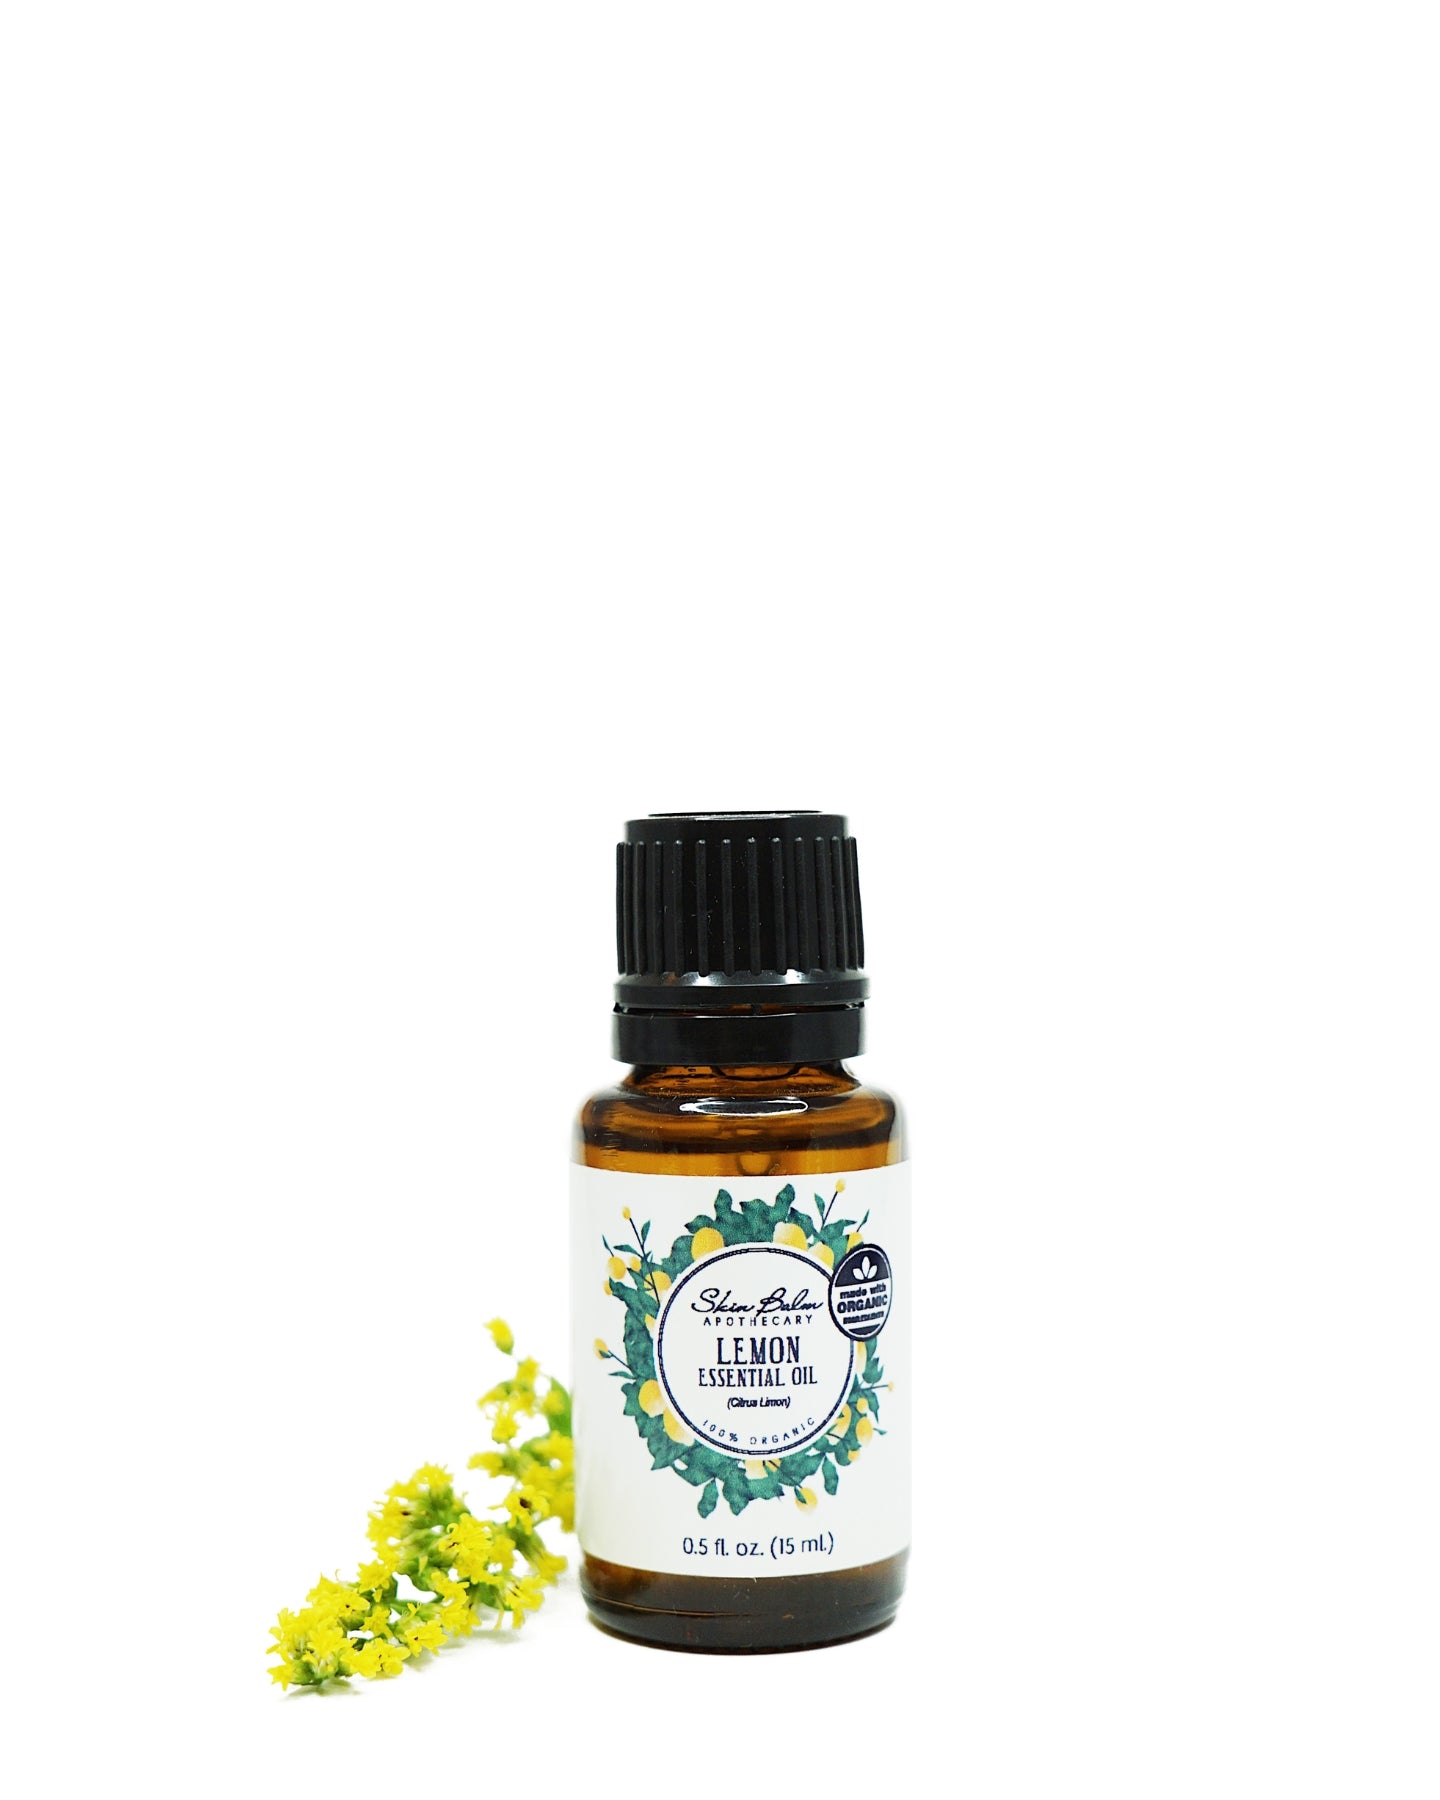 Organic Lemon Essential Oil with yellow flowers against a white background.